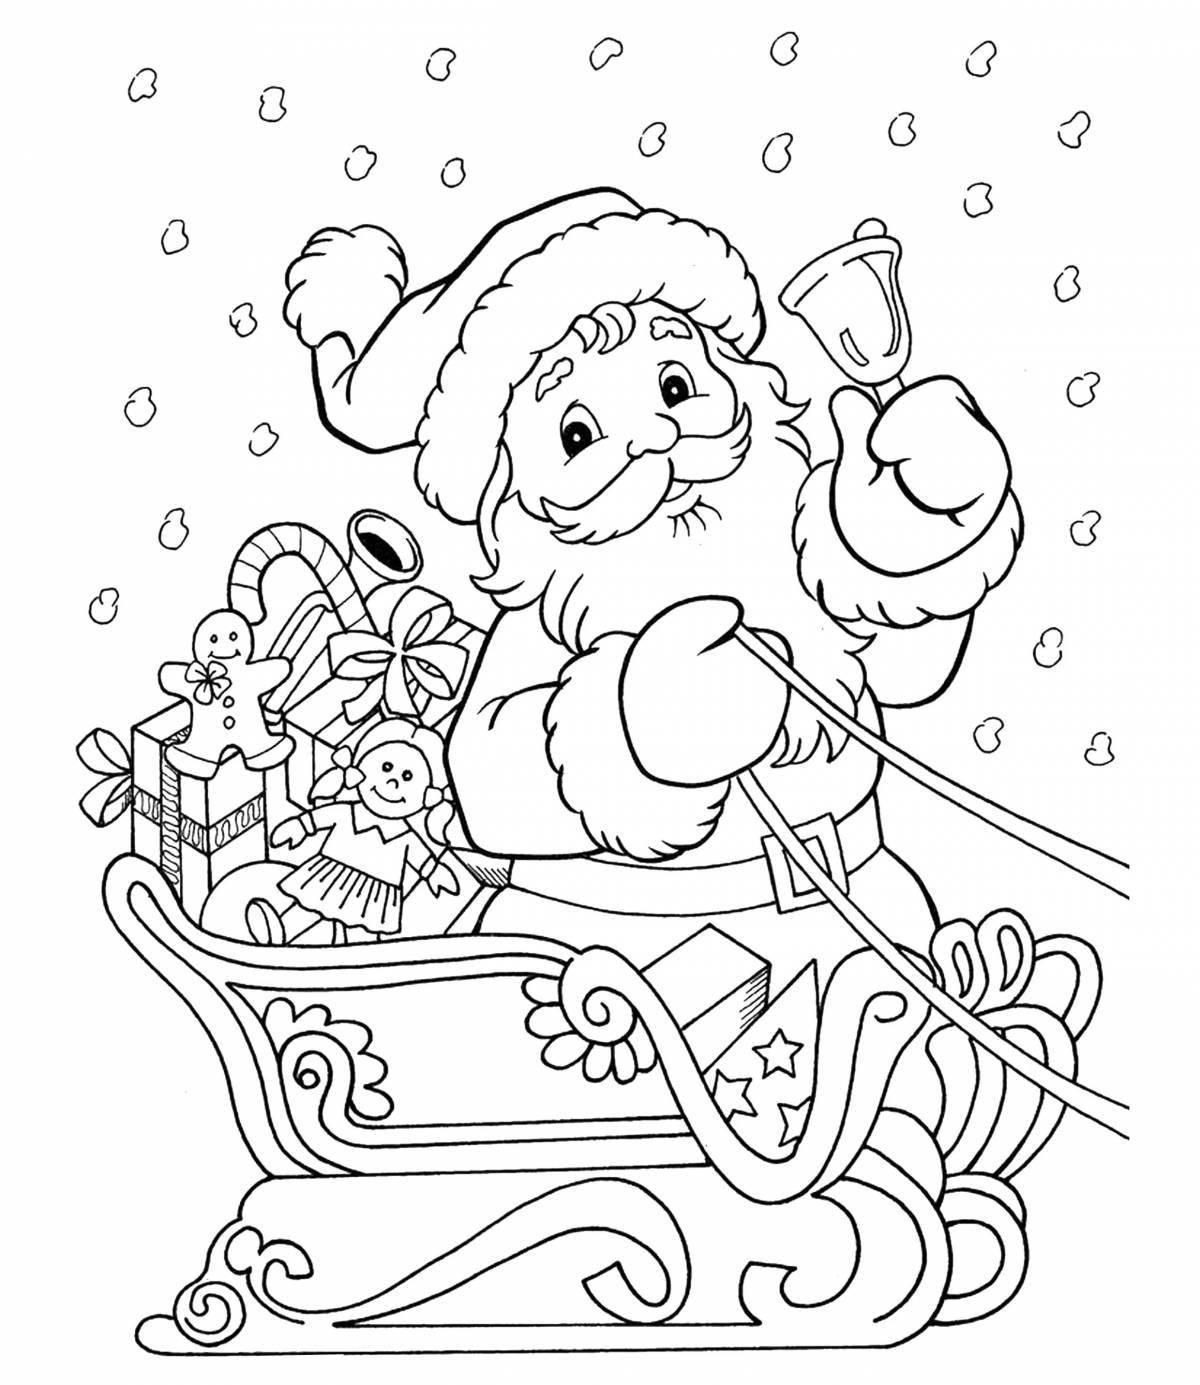 Fun coloring book frost for kids